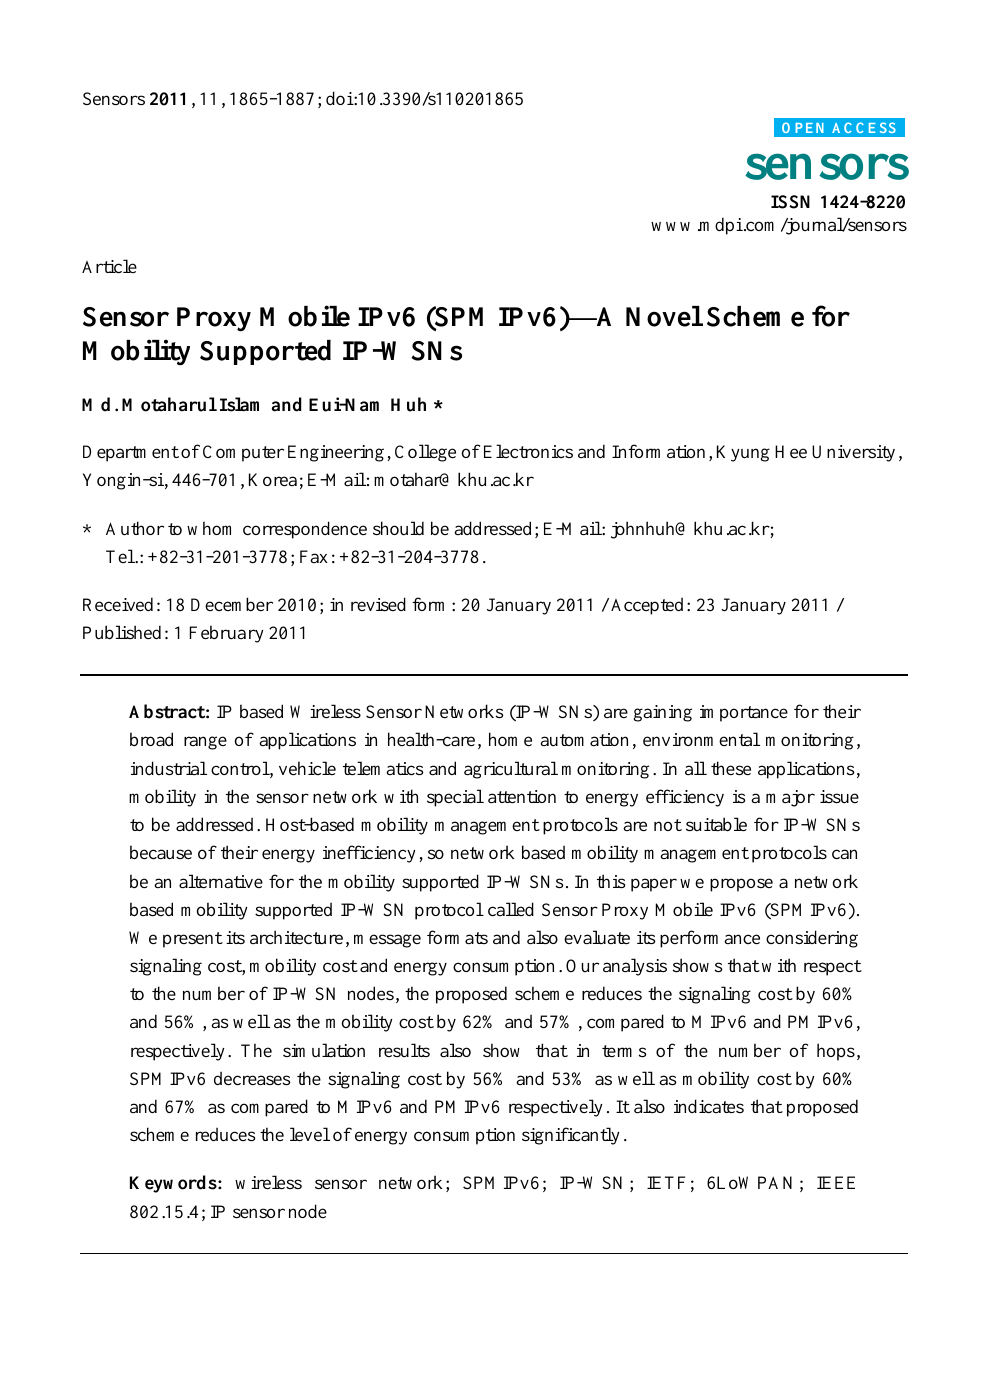 Sensor Proxy Mobile Ipv6 Spmipv6 A Novel Scheme For Mobility Supported Ip Wsns Topic Of Research Paper In Electrical Engineering Electronic Engineering Information Engineering Download Scholarly Article Pdf And Read For Free On